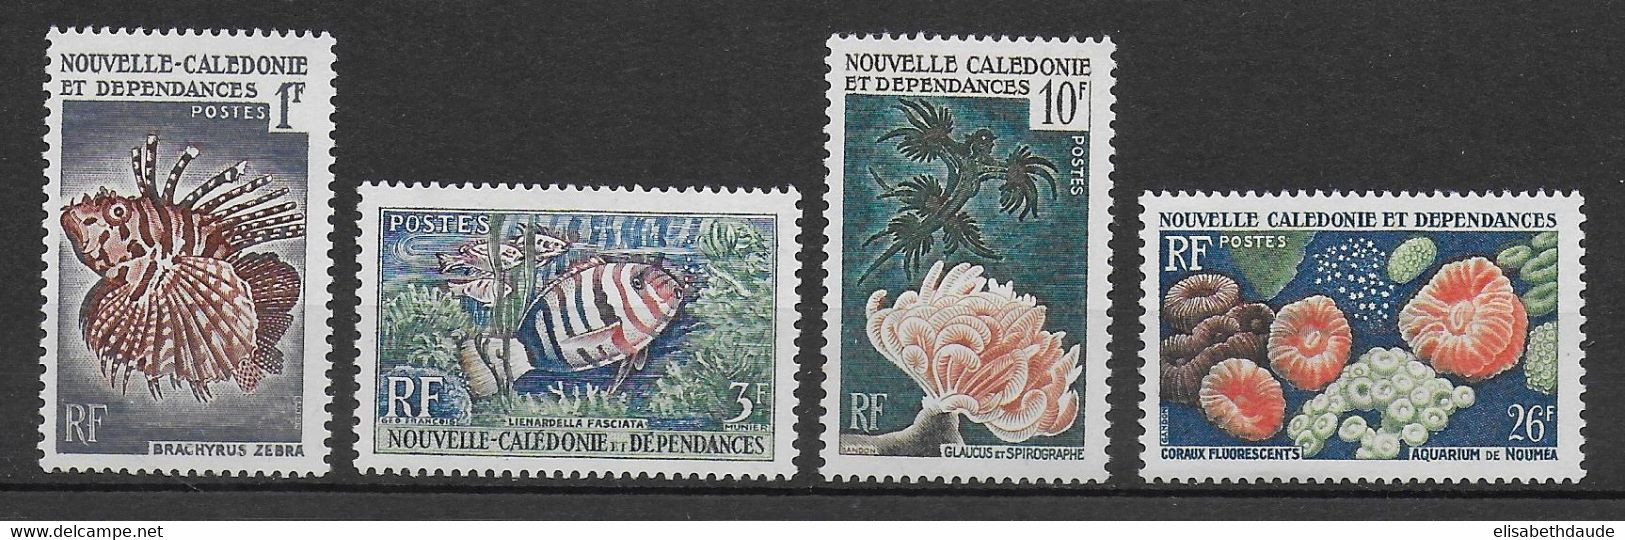 NELLE CALEDONIE - ANNEE COMPLETE 1959 - YVERT N°291/294 ** MNH - COTE = 15 EUR - CORAUX ET POISSONS - Años Completos